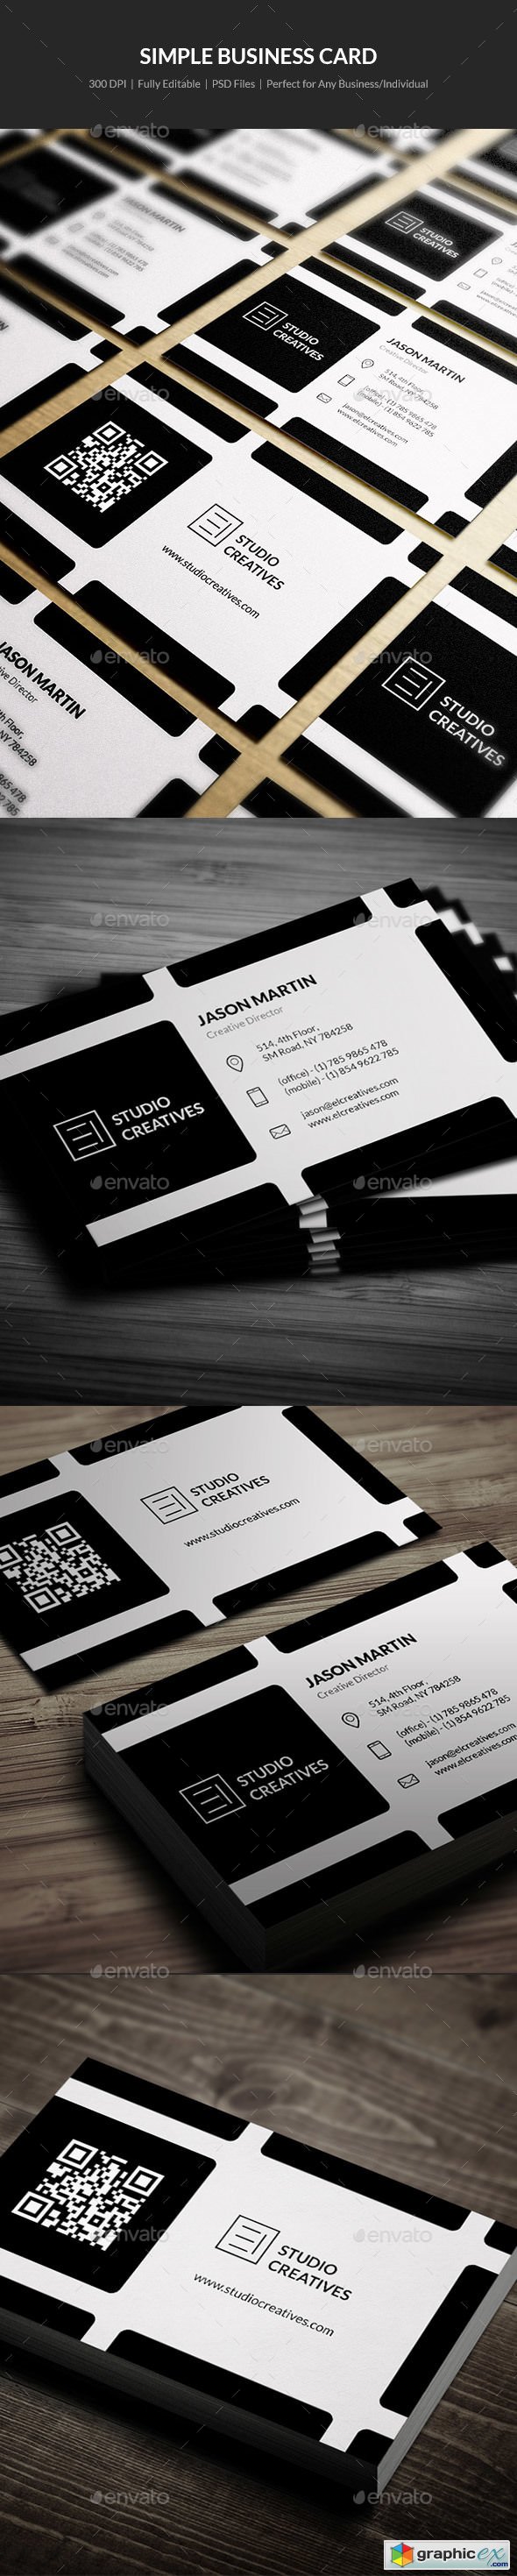 Simple Business Card - 13